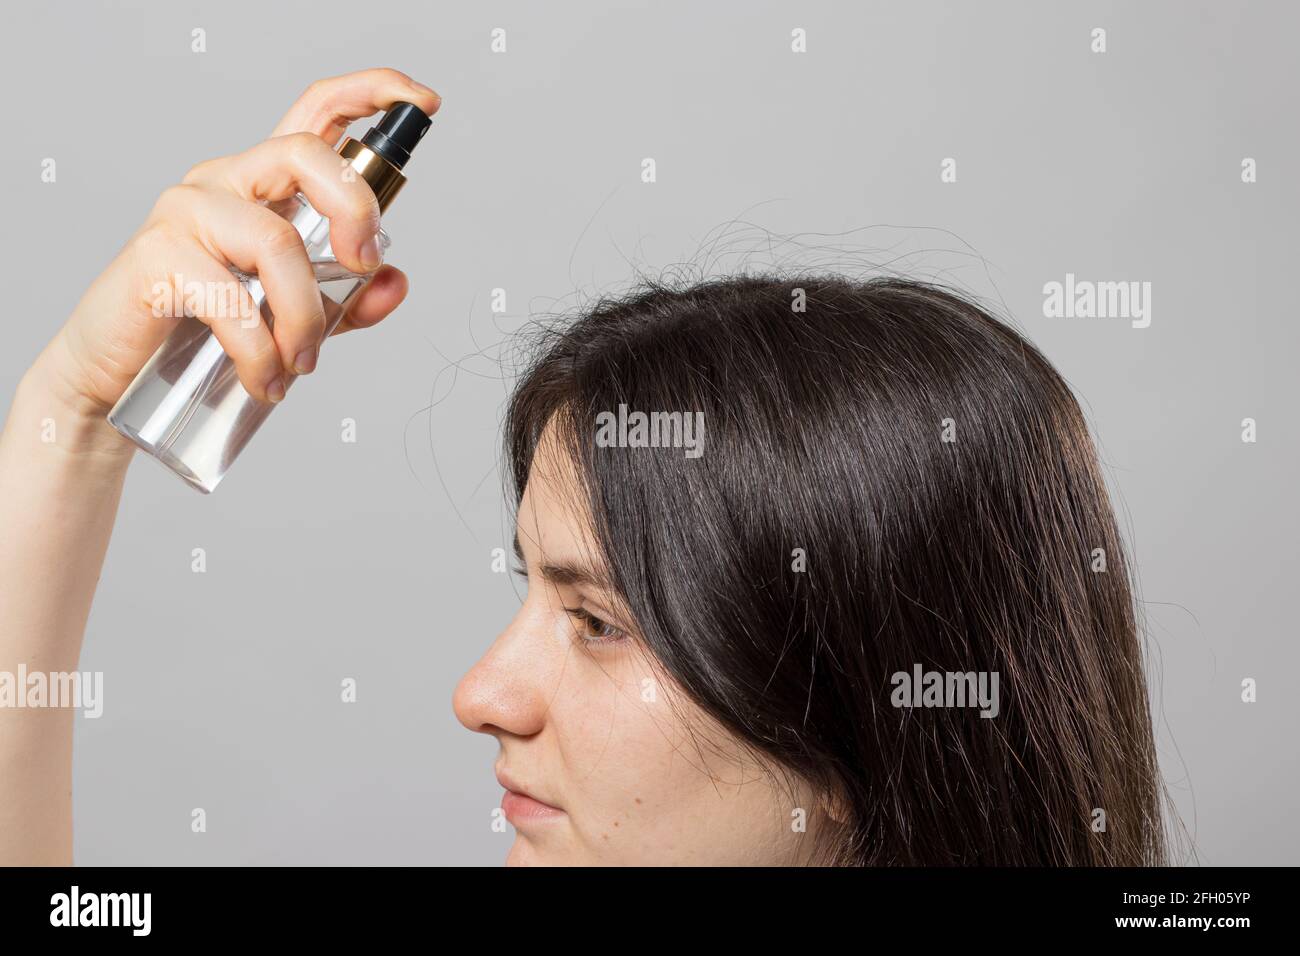 The girl puts on her hair a tonic of hydrolyte from a bottle. Hair care at home. Stock Photo